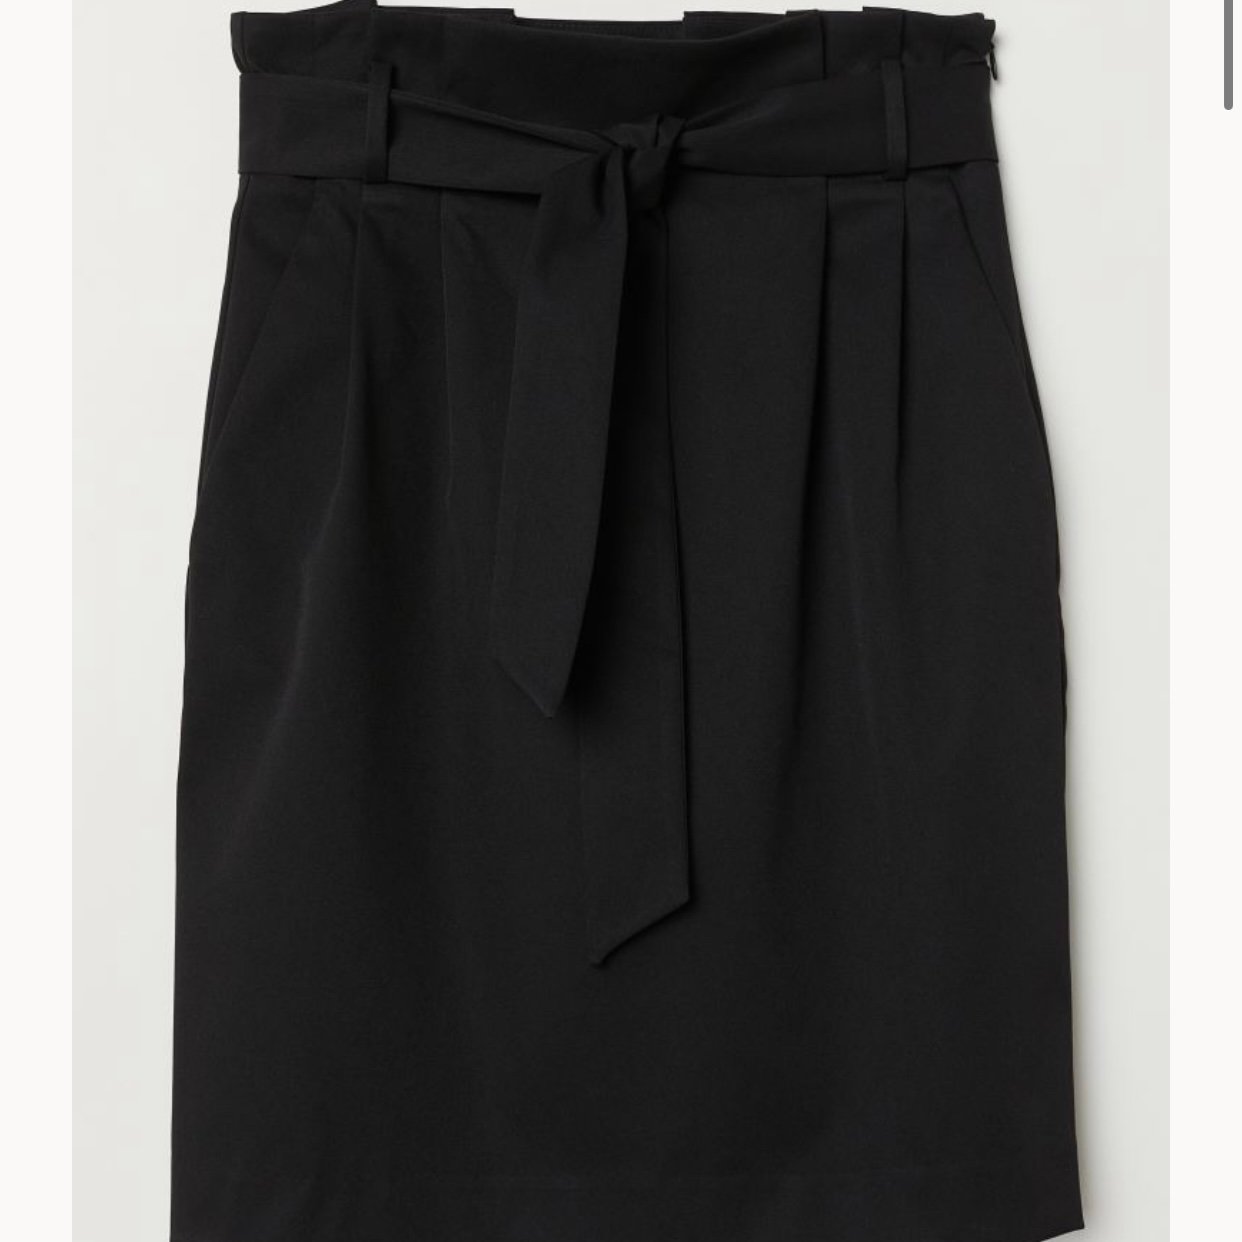 high discount H&M Skirt with Tie Belt Straight Pencil HNn0FpzNo Online Shop